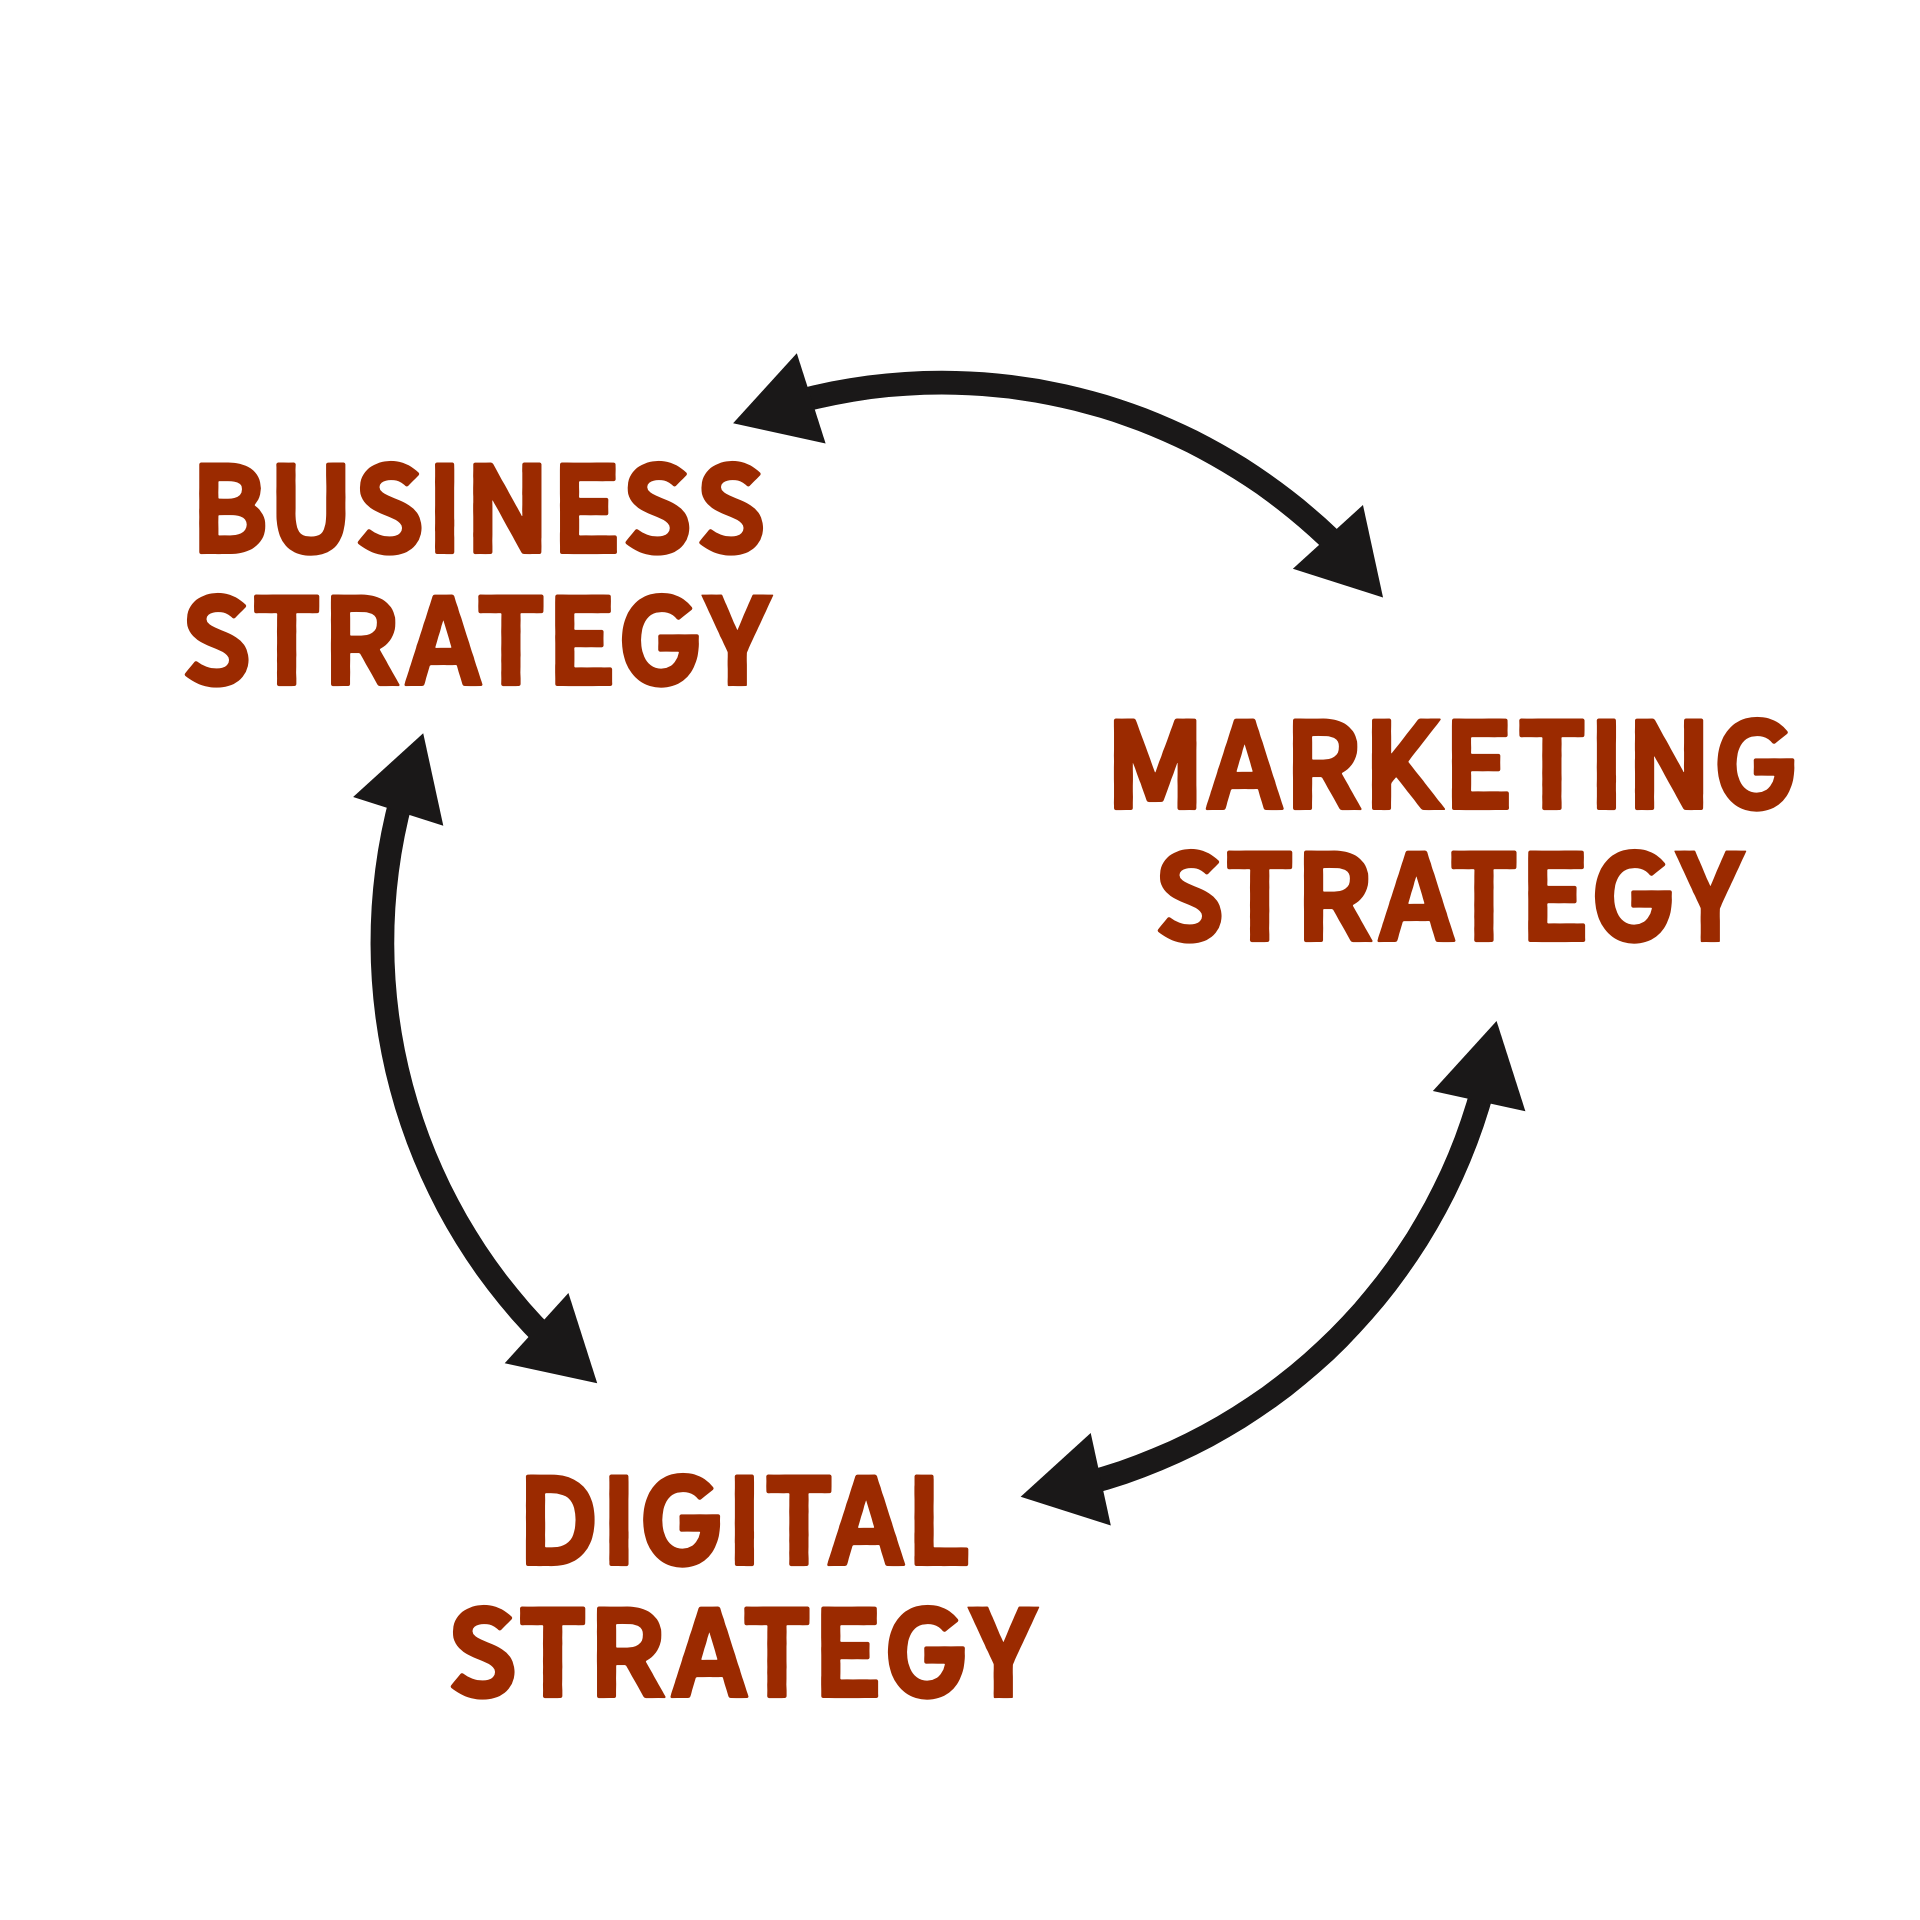 digital marketing should work with your business strategy